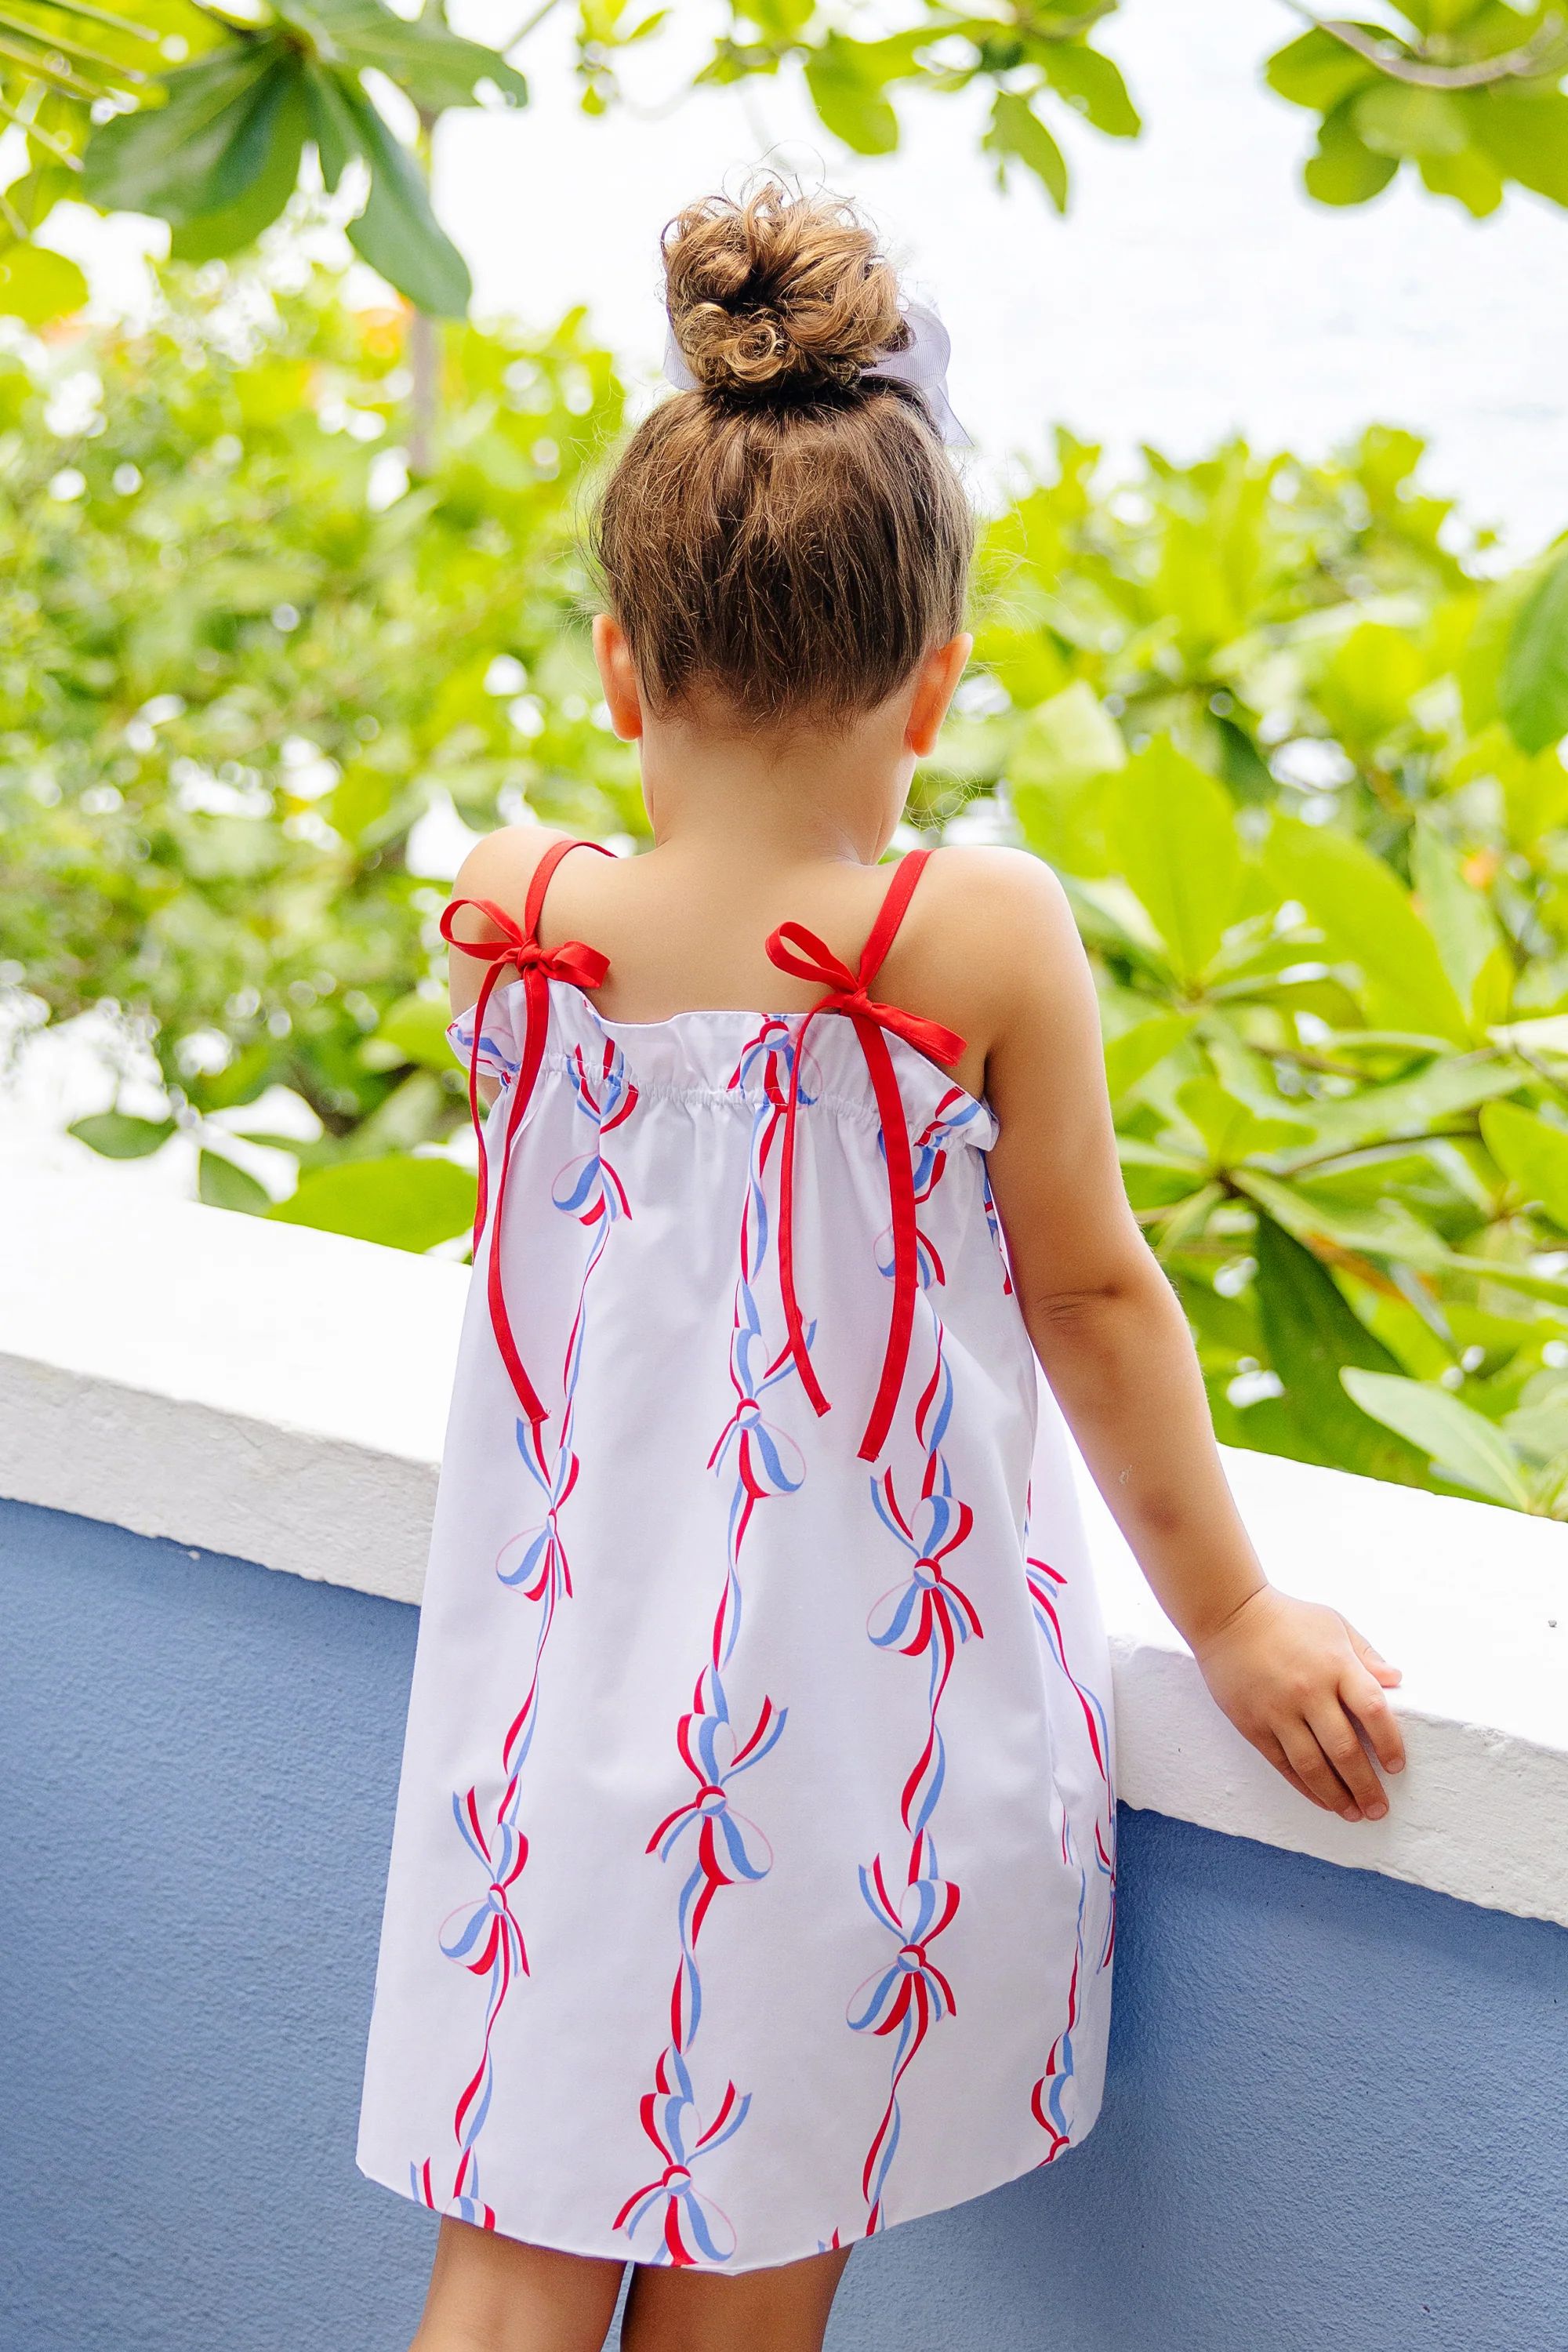 Lainey's Little Dress - America's Birthday Bows with Richmond Red | The Beaufort Bonnet Company